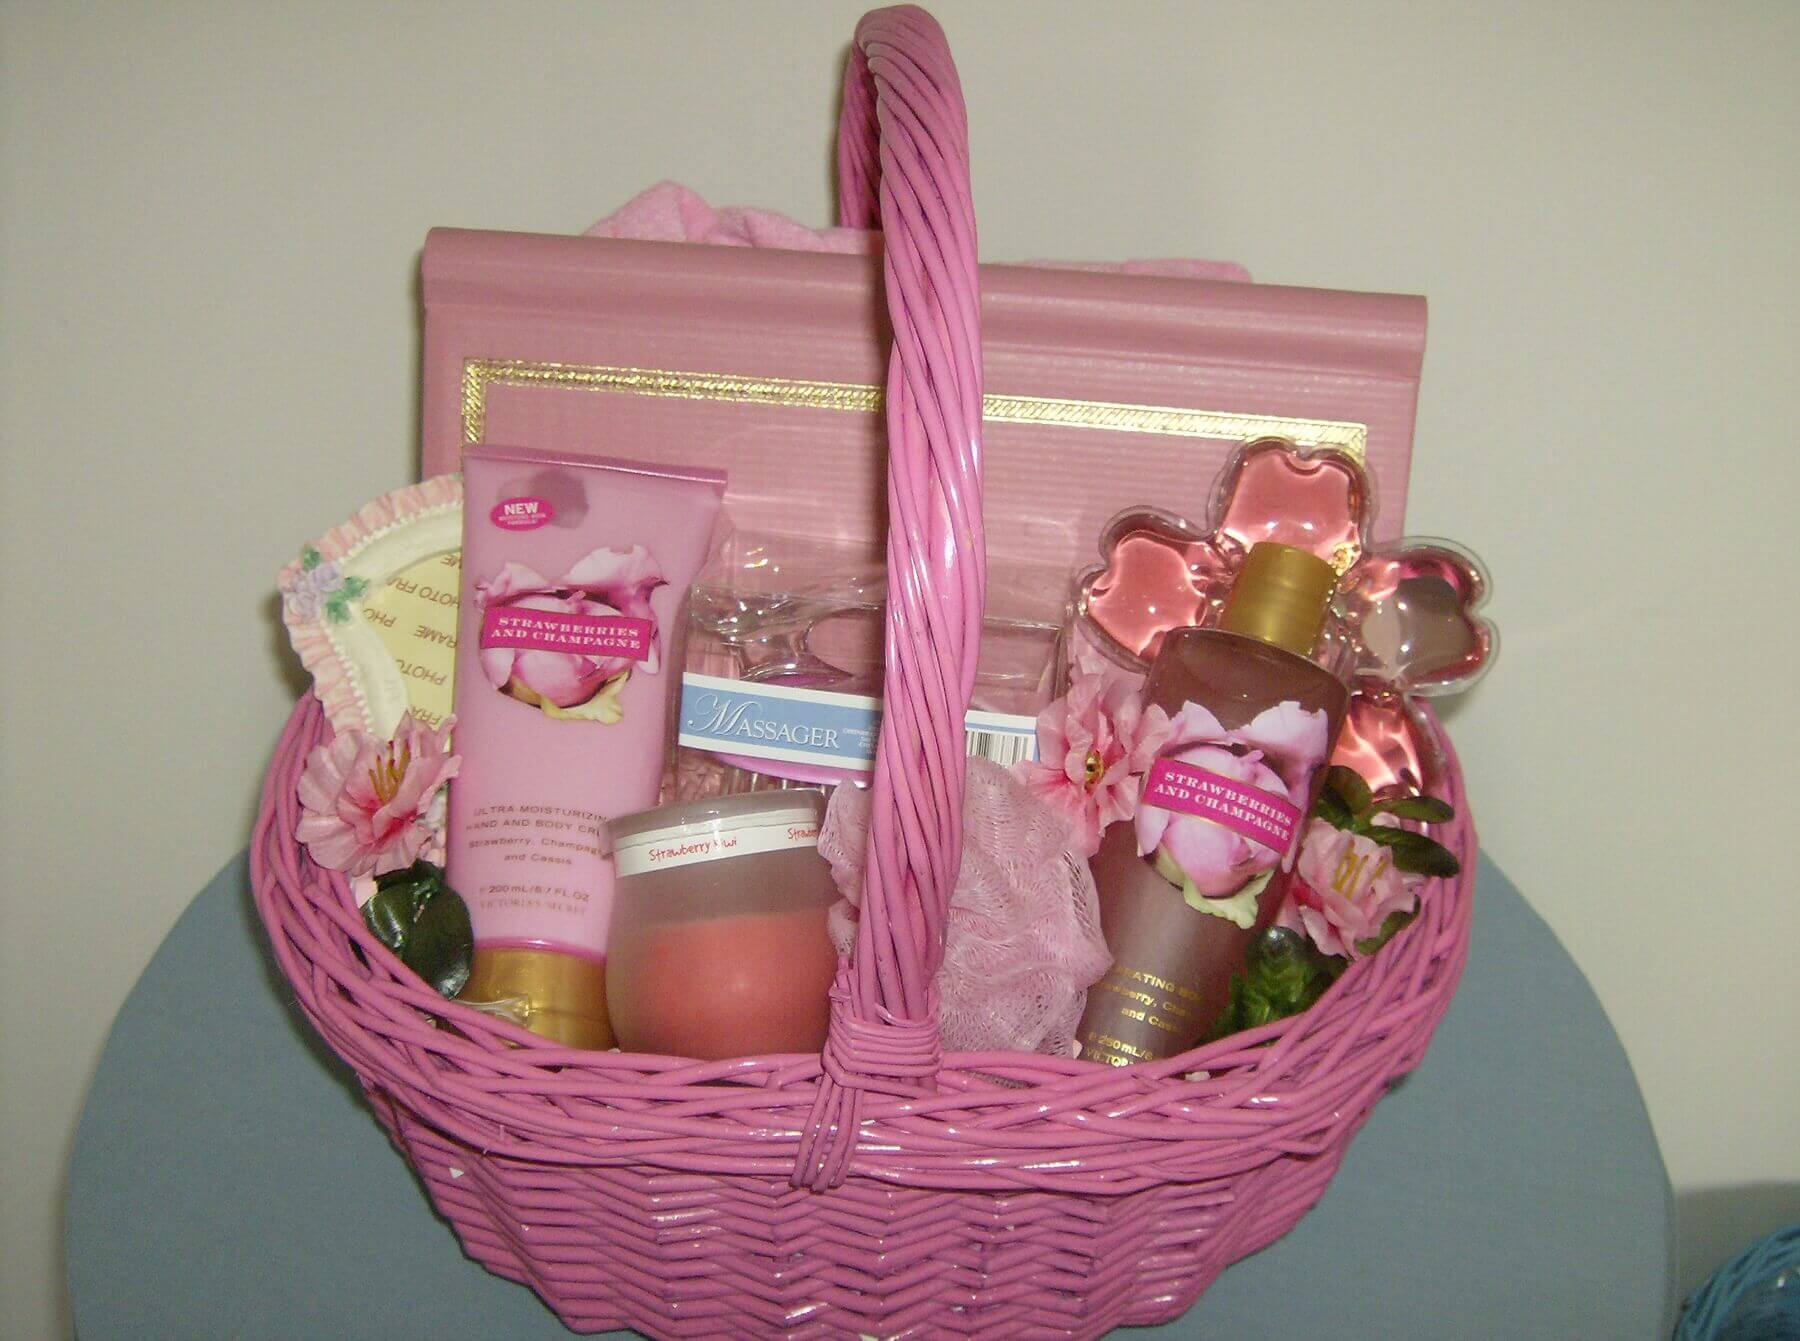 Best Valentine's Day Gift Baskets, Boxes & Gift Sets Ideas